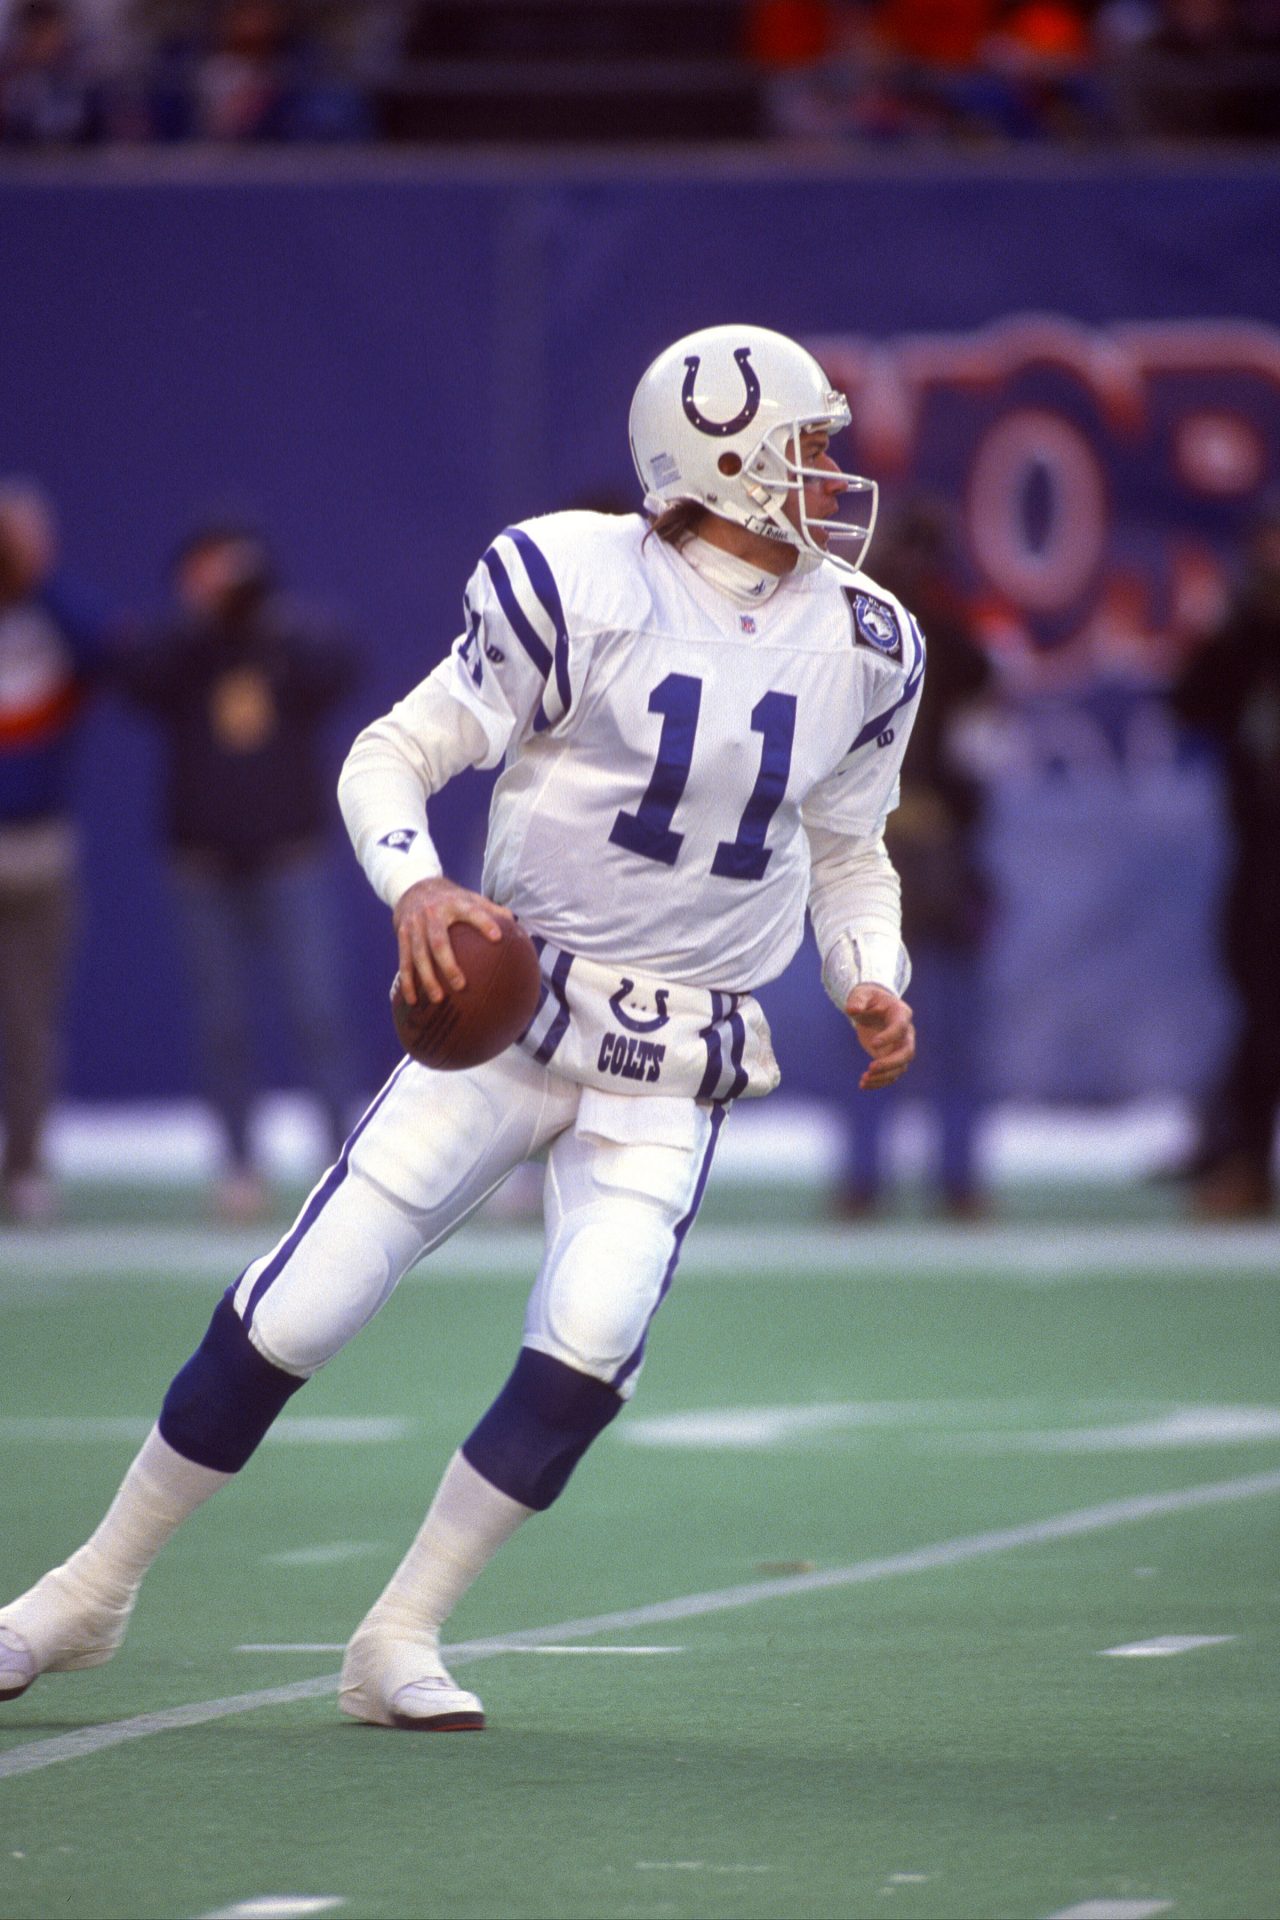 1990: Indianapolis Colts Select Jeff George